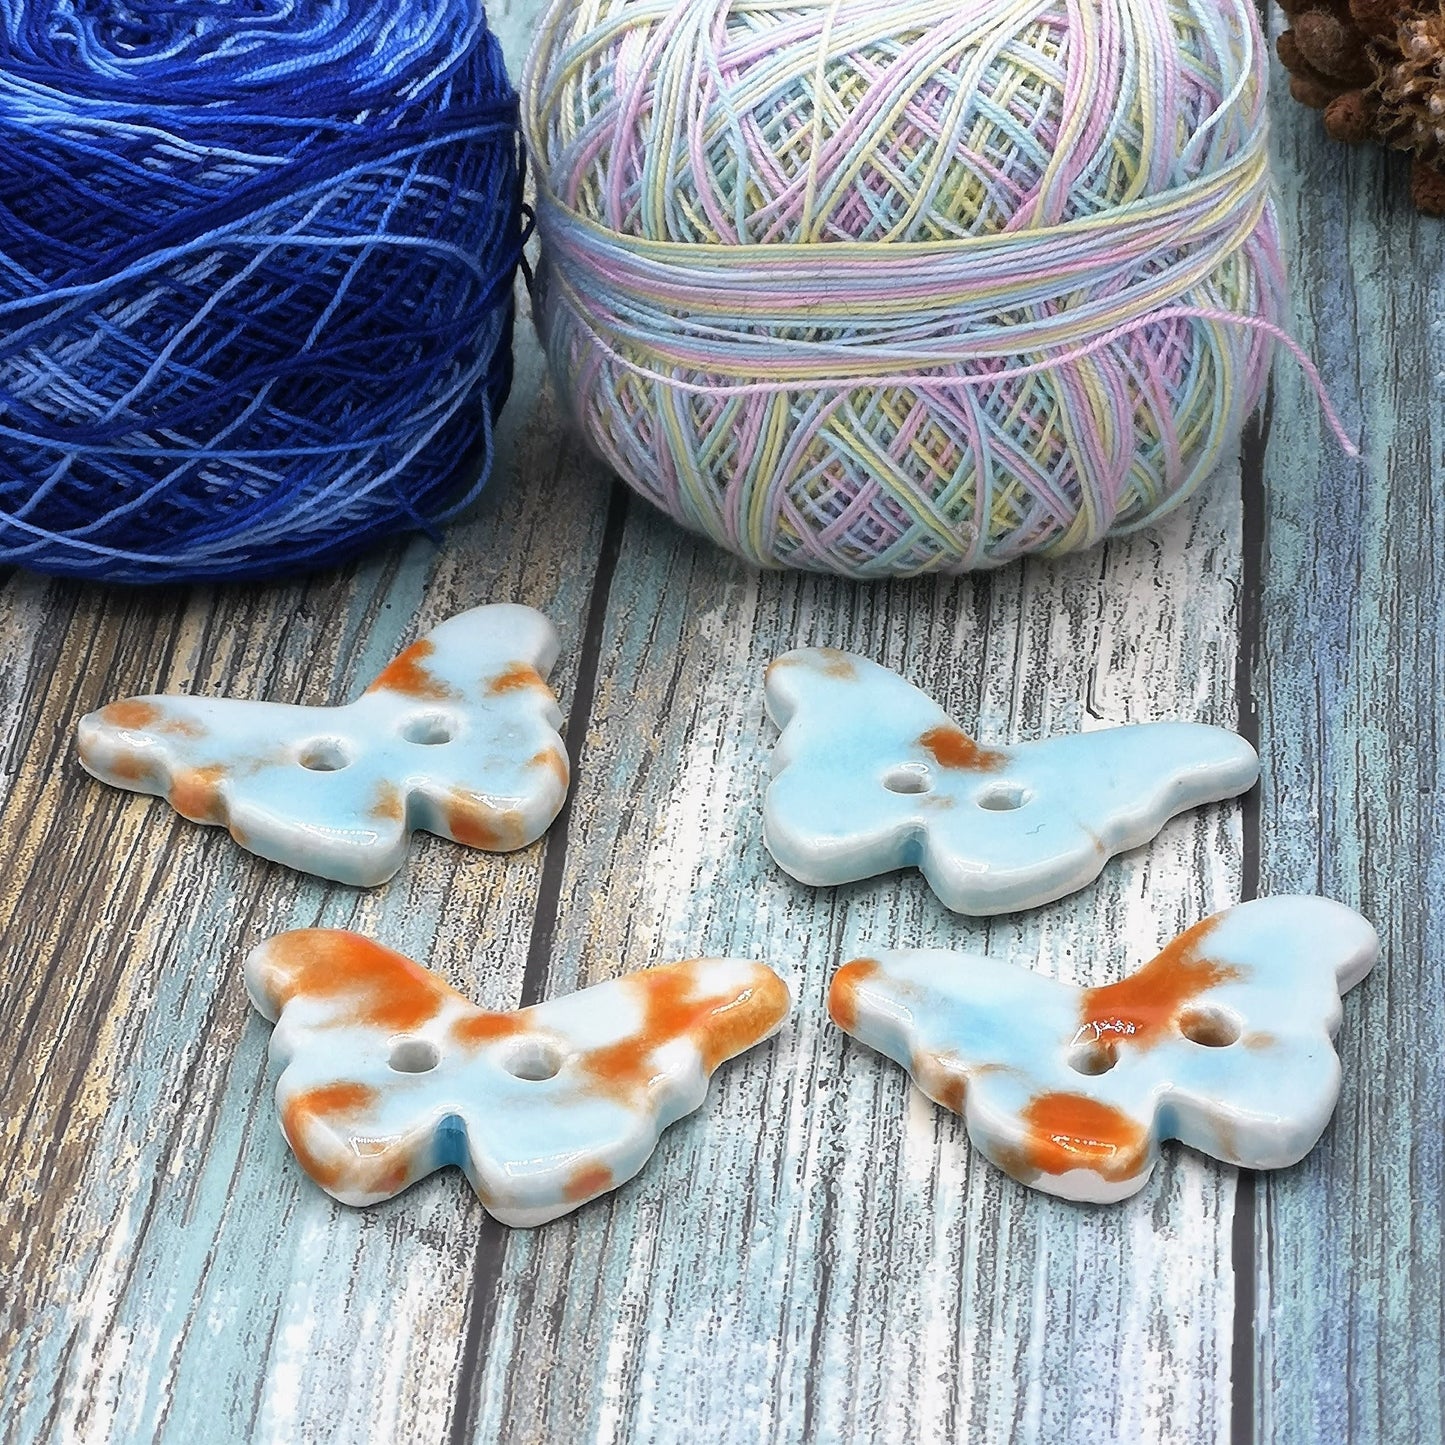 Butterfly Buttons, Cute Buttons, Designer Button, Set of 4 Ceramic Sewing Button For Crafts, Large Fancy Porcelain Buttons Gifts For Her - Ceramica Ana Rafael